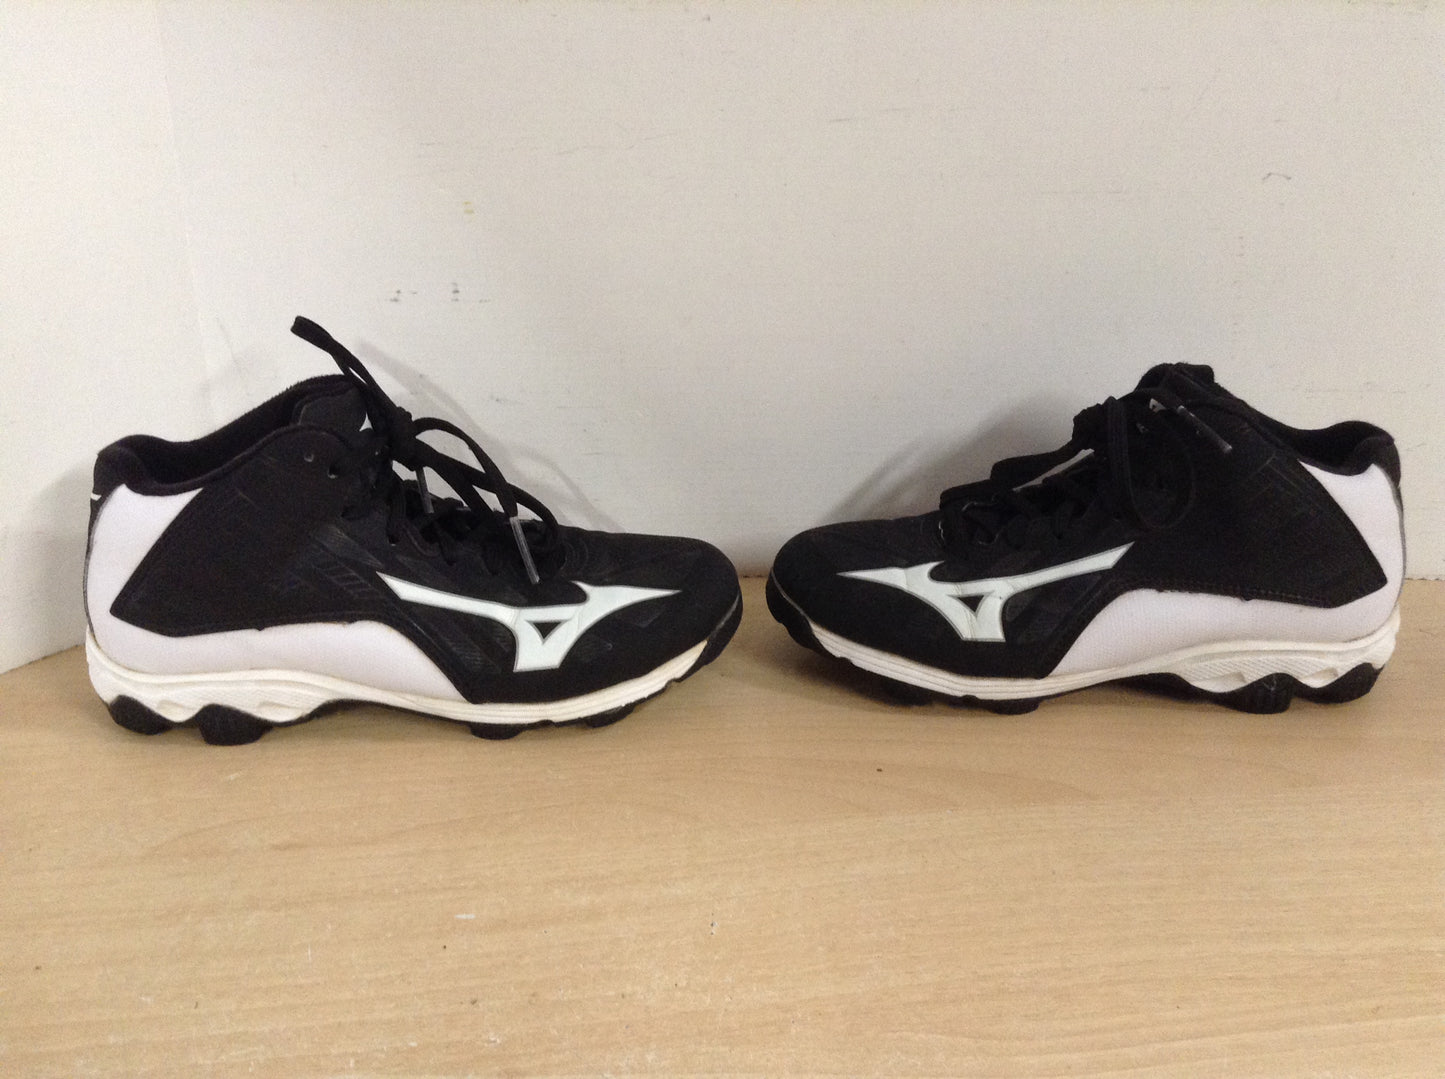 Baseball Shoes Cleats Child Size 3 Mizuno Black White Excellent